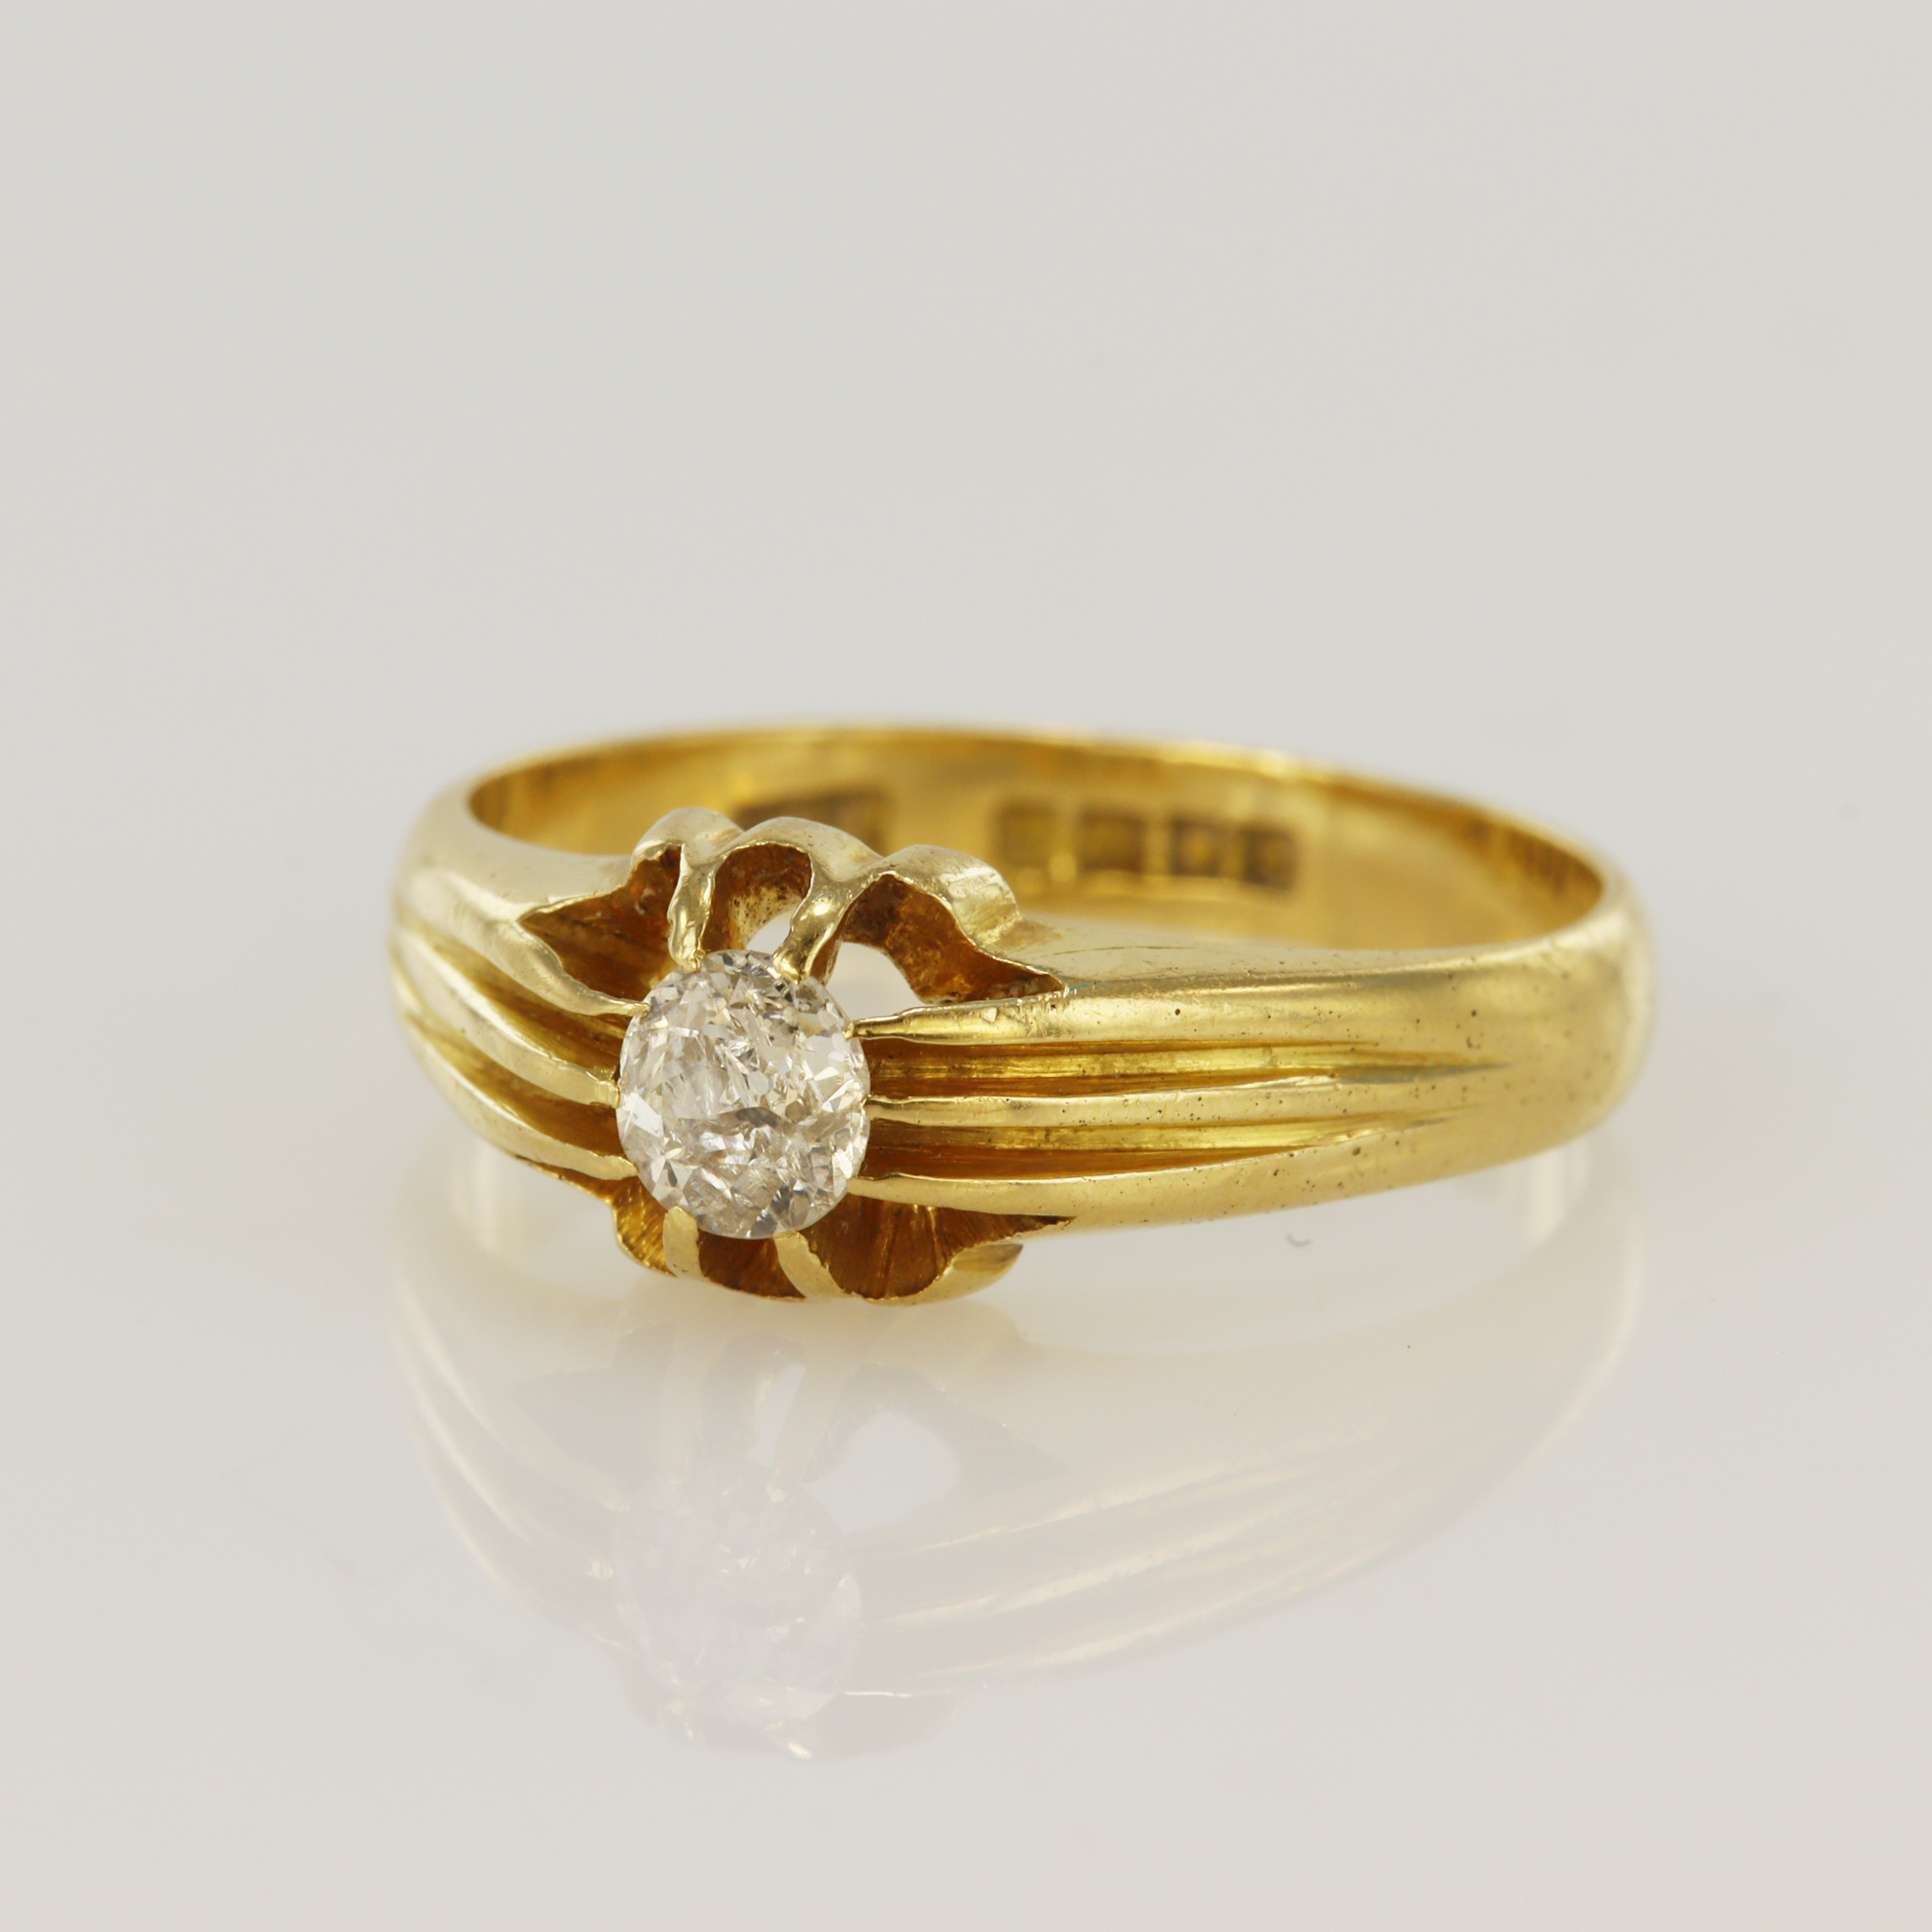 18ct yellow gold diamond solitaire ring, one old cut diamond approx. 0.40ct, finger size R, weight